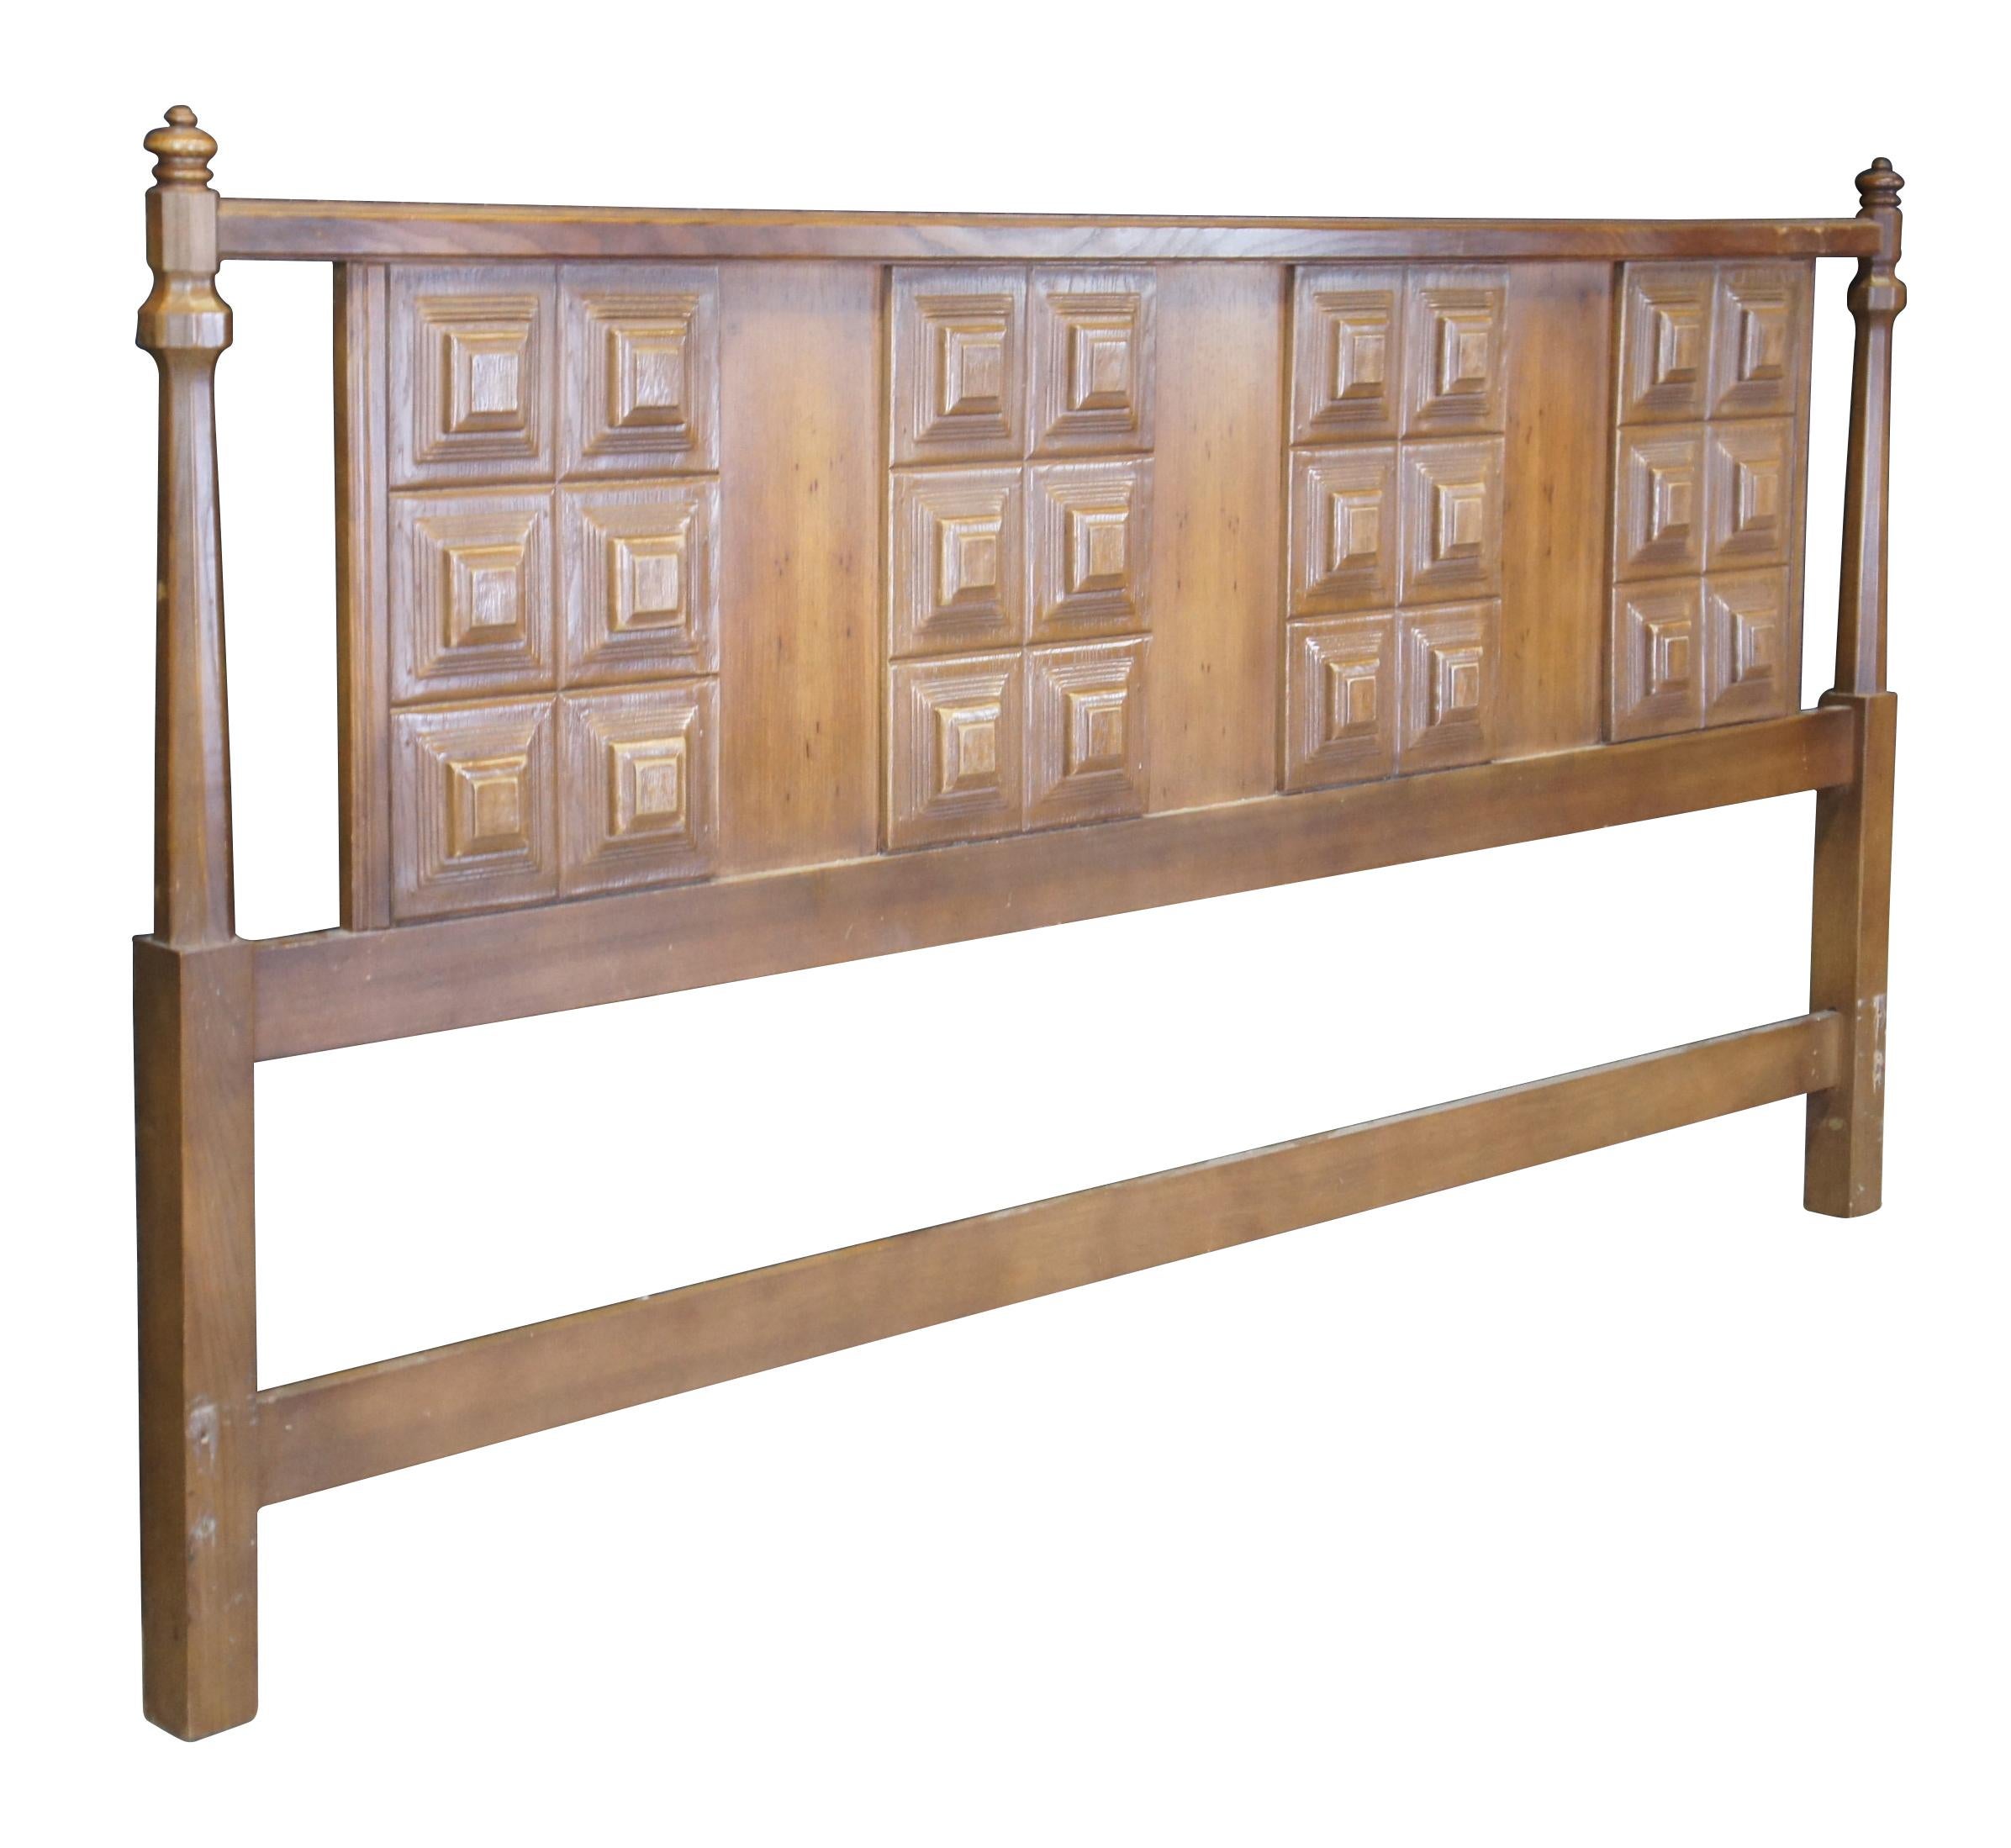 Stanley Furniture King Size Paneled Oak Headboard. Features brutalist styling paneling set between two posts. Marked 480244, 512 8 along backside.